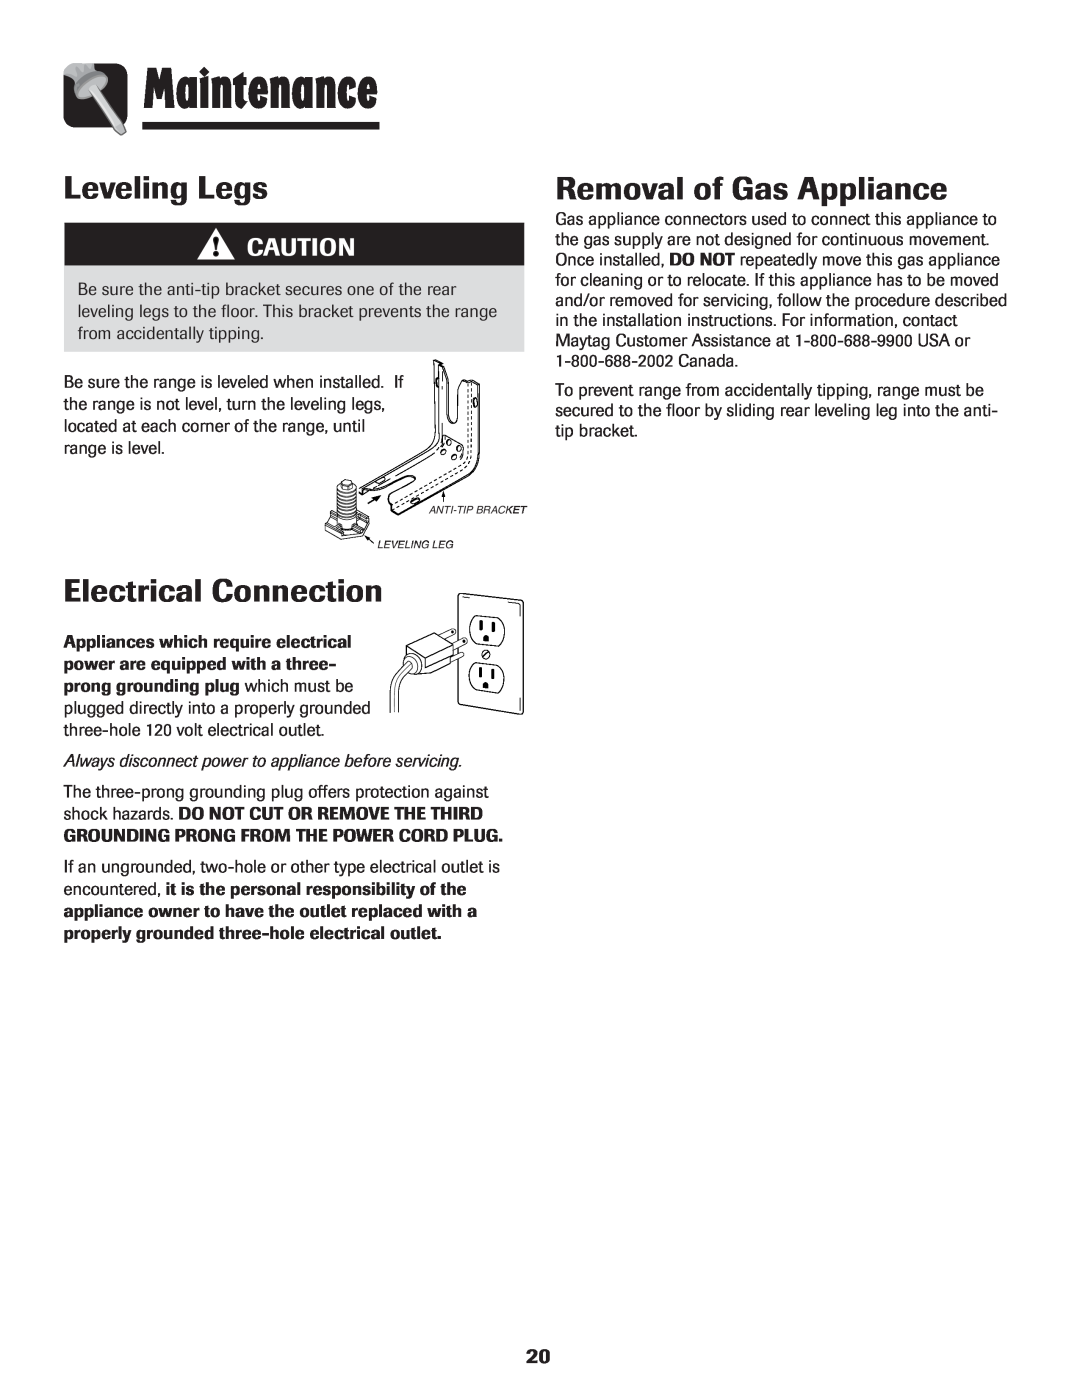 Maytag MGR6751BDW manual Leveling Legs, Electrical Connection, Removal of Gas Appliance, Maintenance 